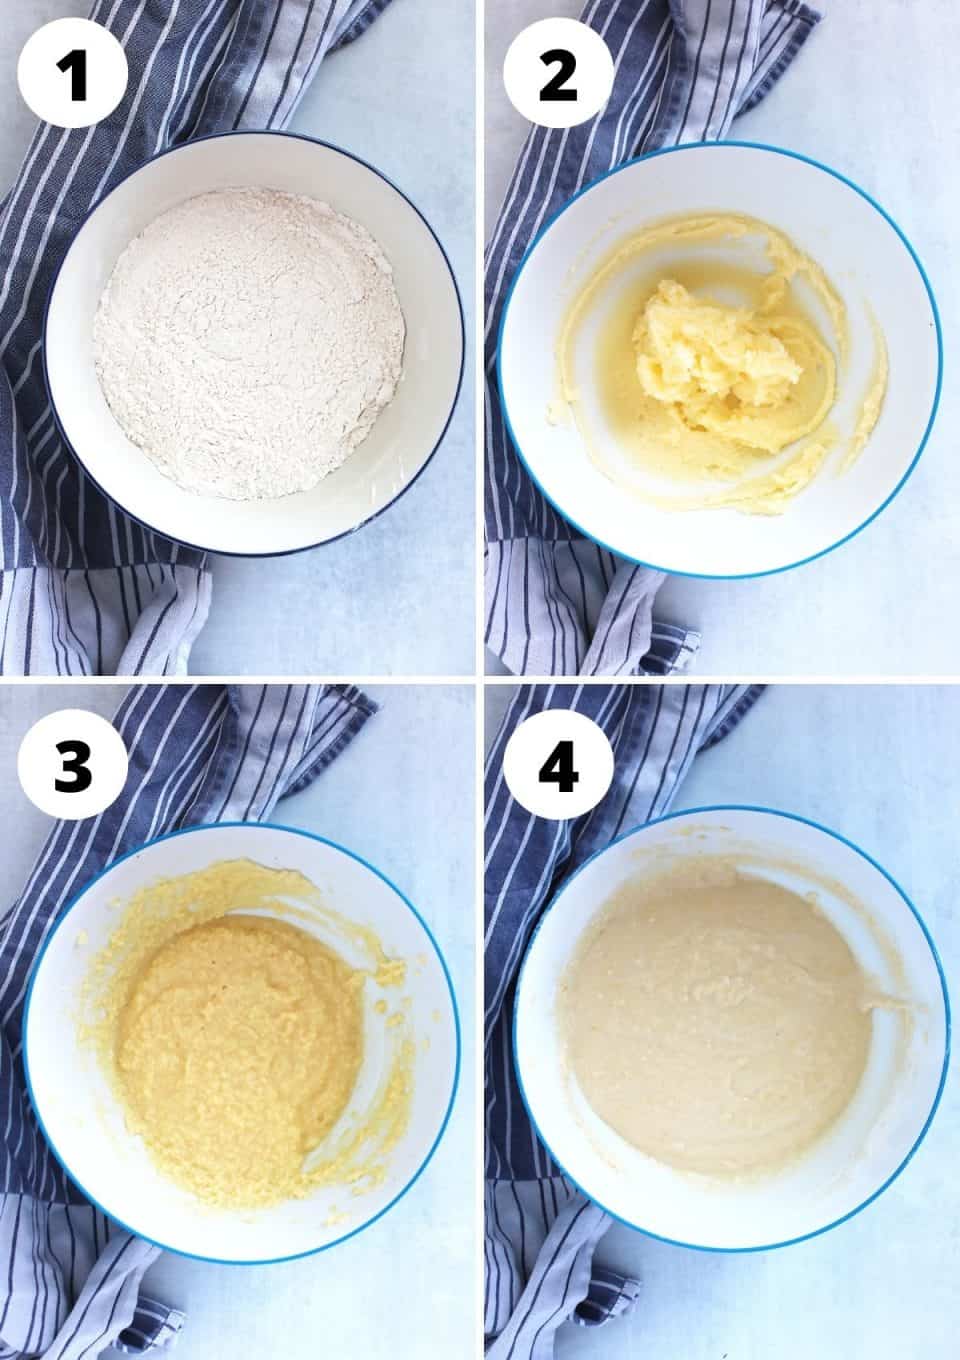 Four step by step photos to show how to make the pound cake batter.